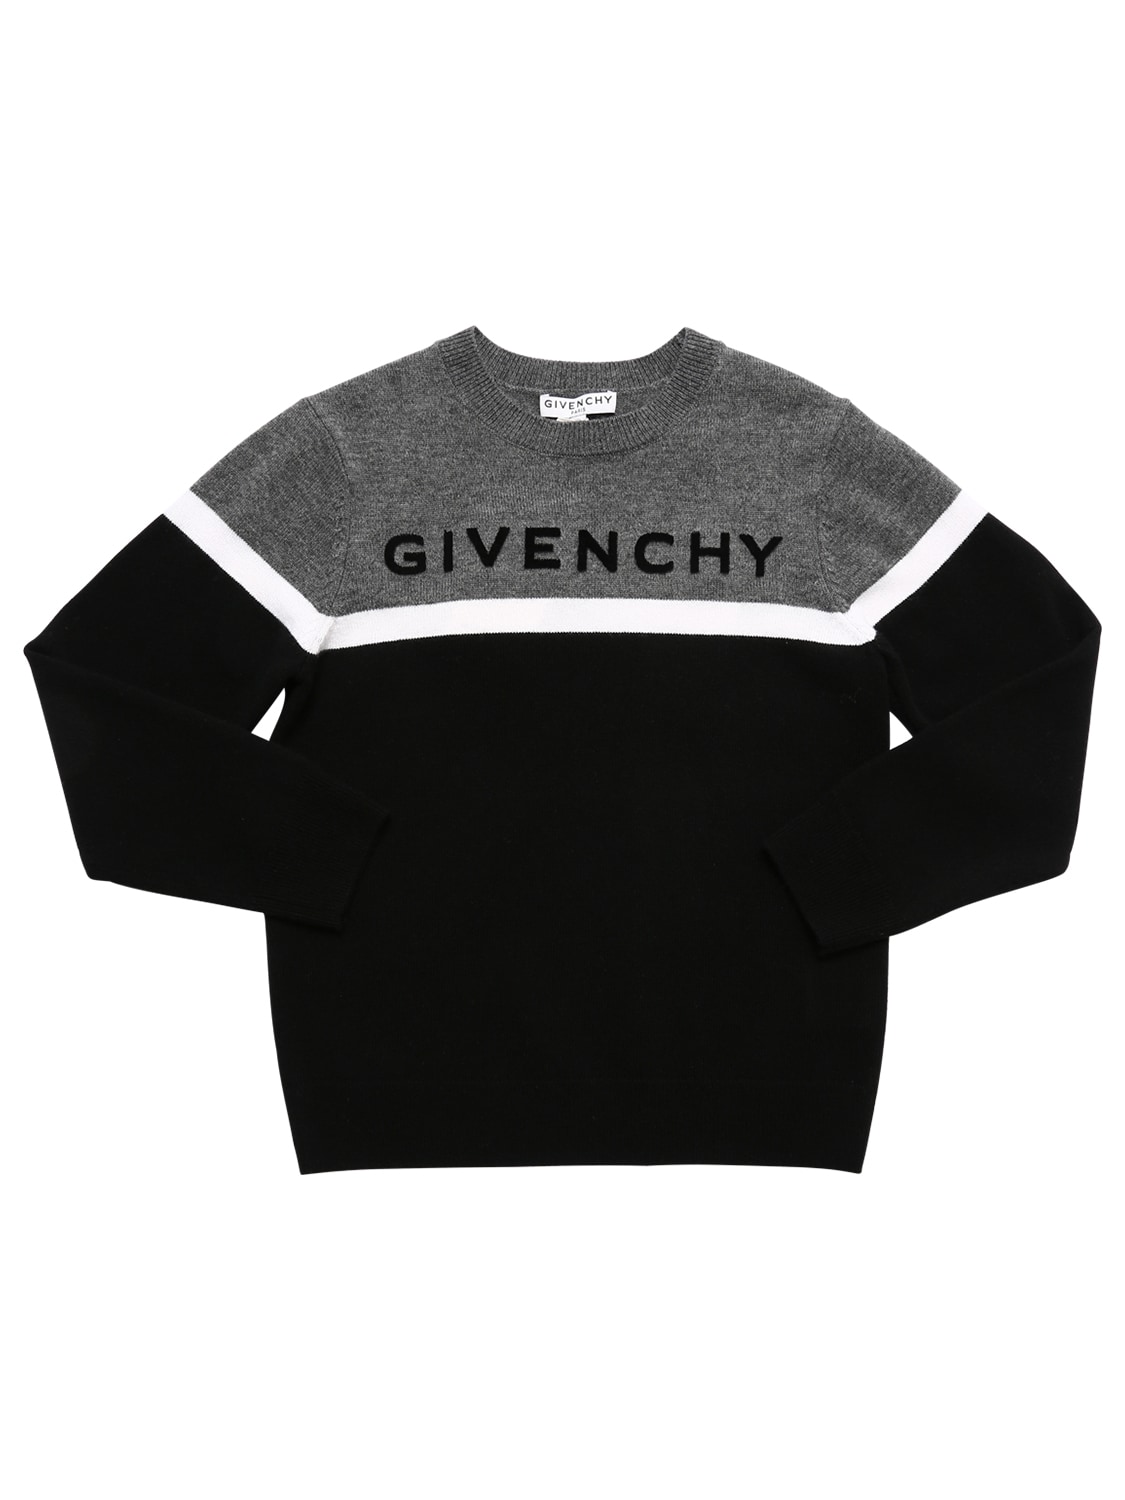 GIVENCHY LOGO PRINT WOOL & CASHMERE SWEATER,72IOFL005-TTYW0